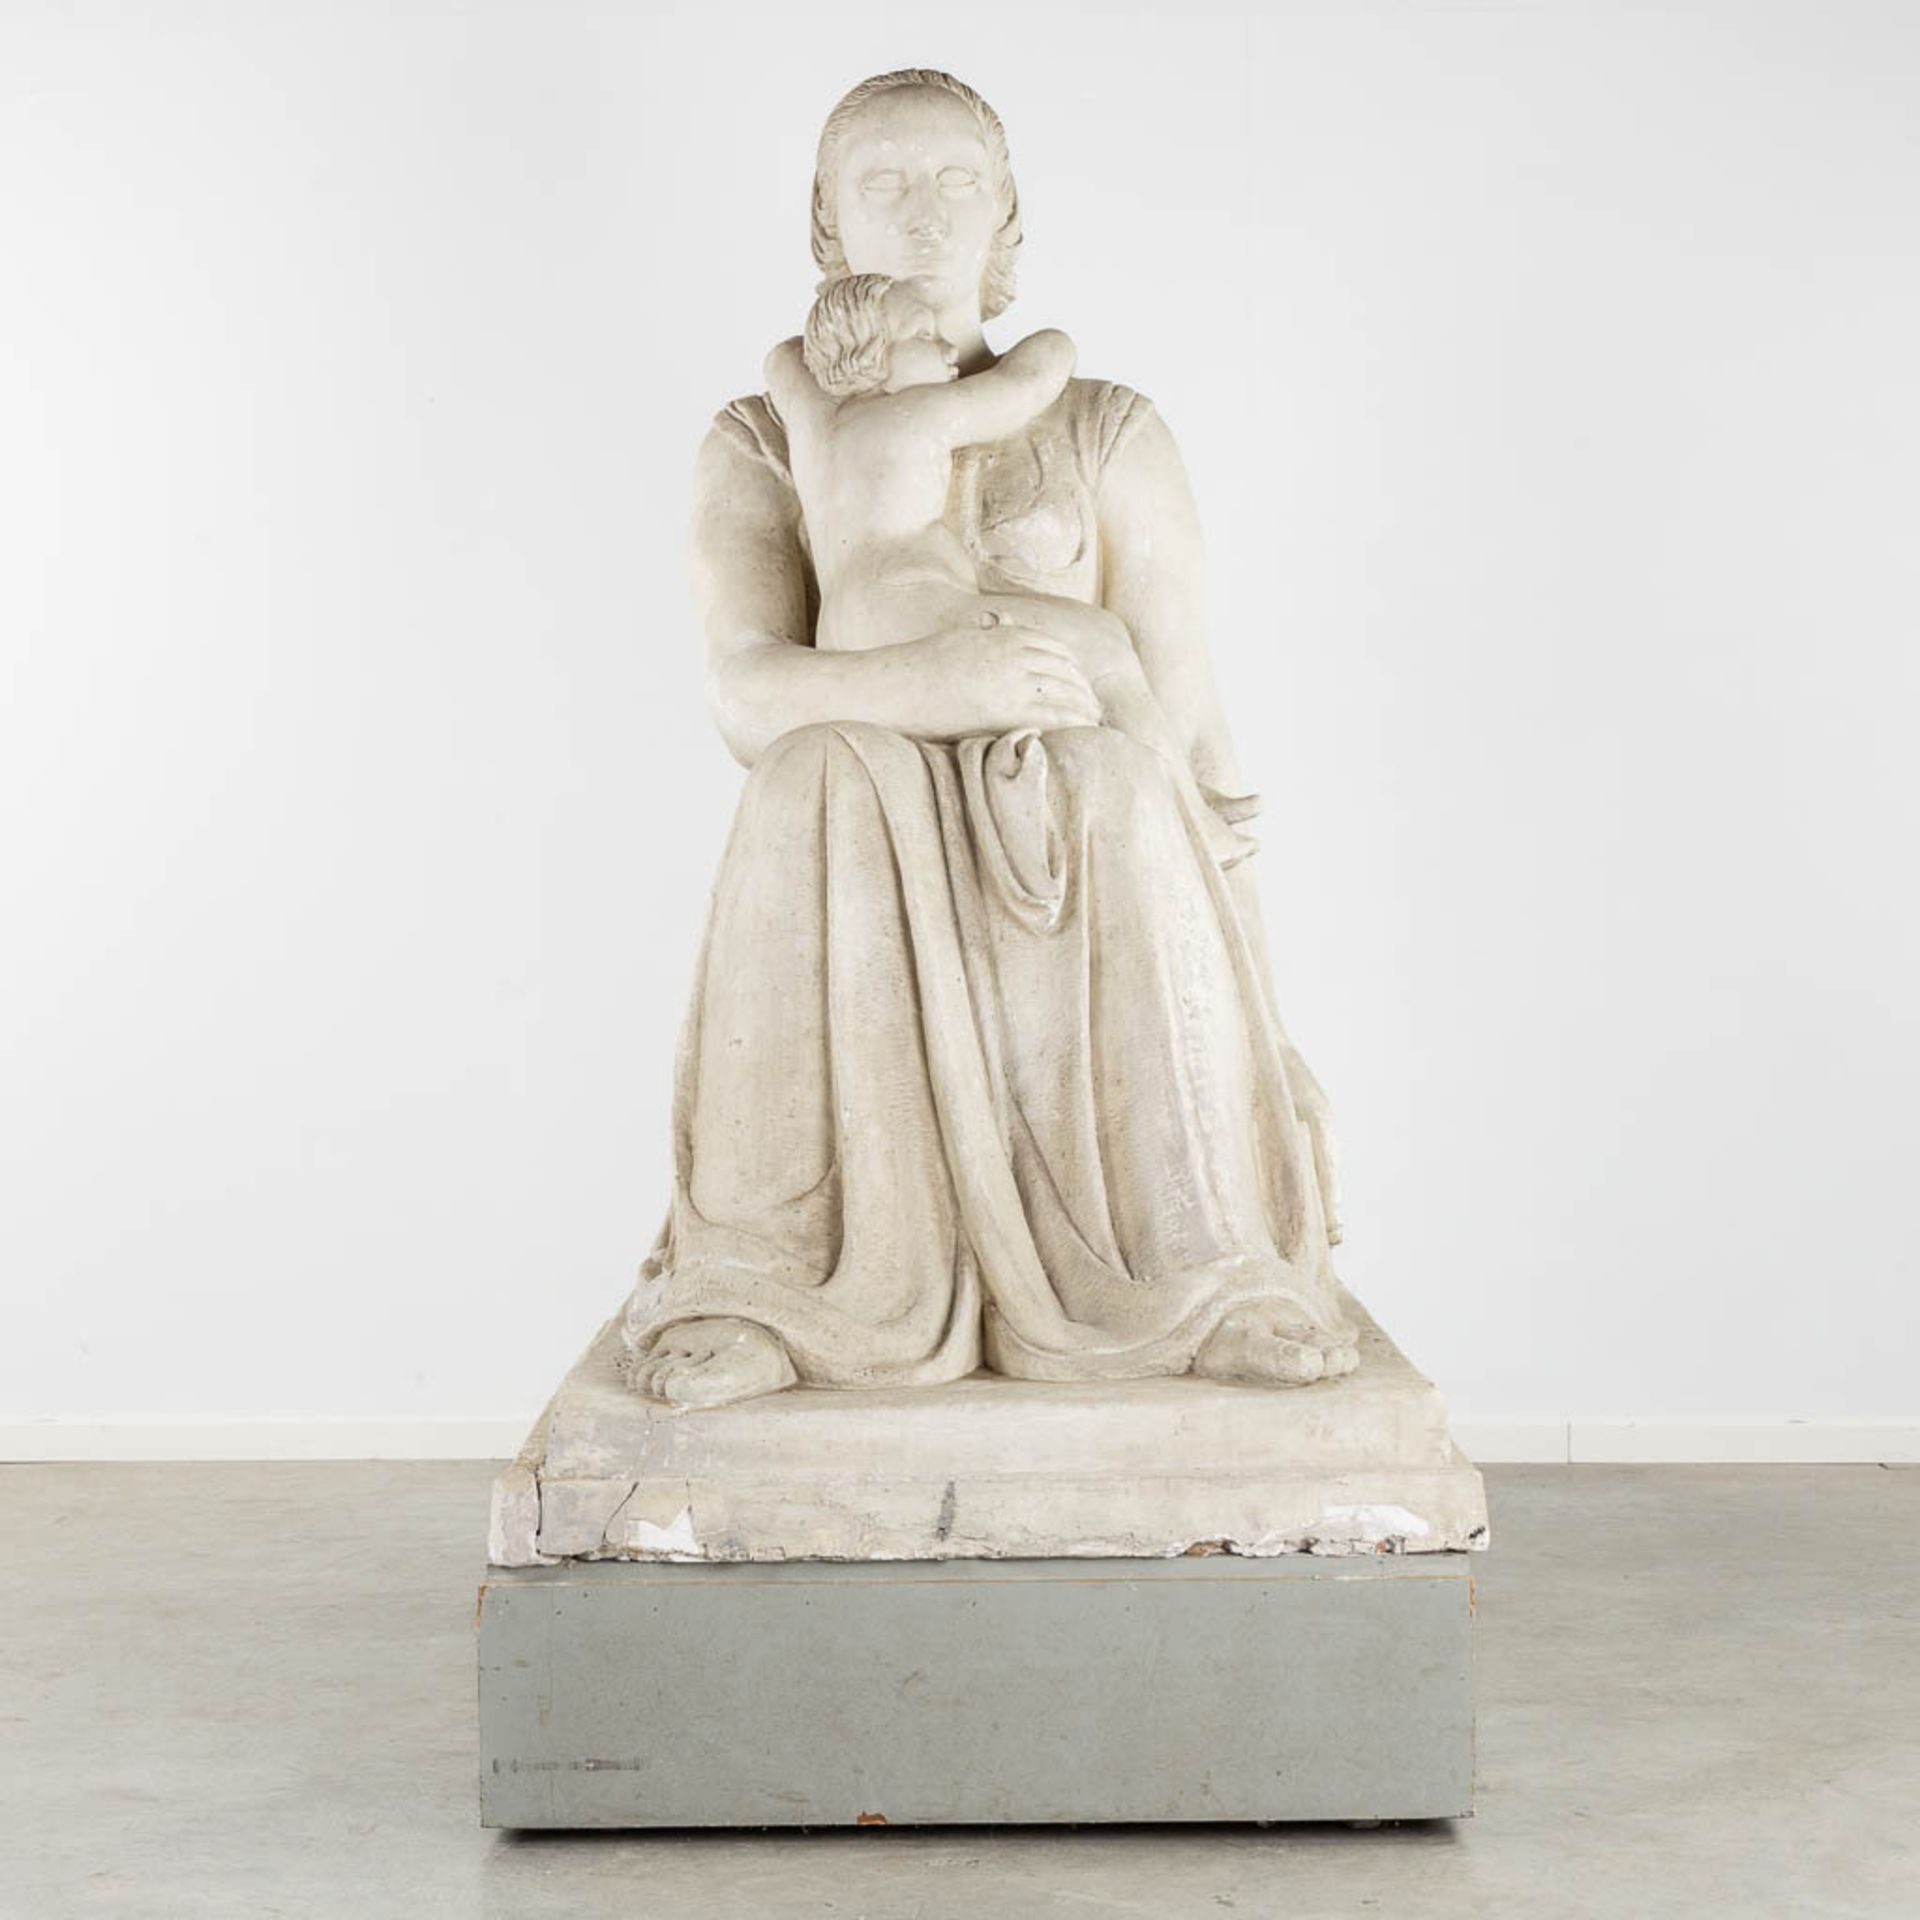 Karel AUBROECK (1894-1986) 'Mother and Child' an exceptionally large sculpture, plaster. (L:152 x W: